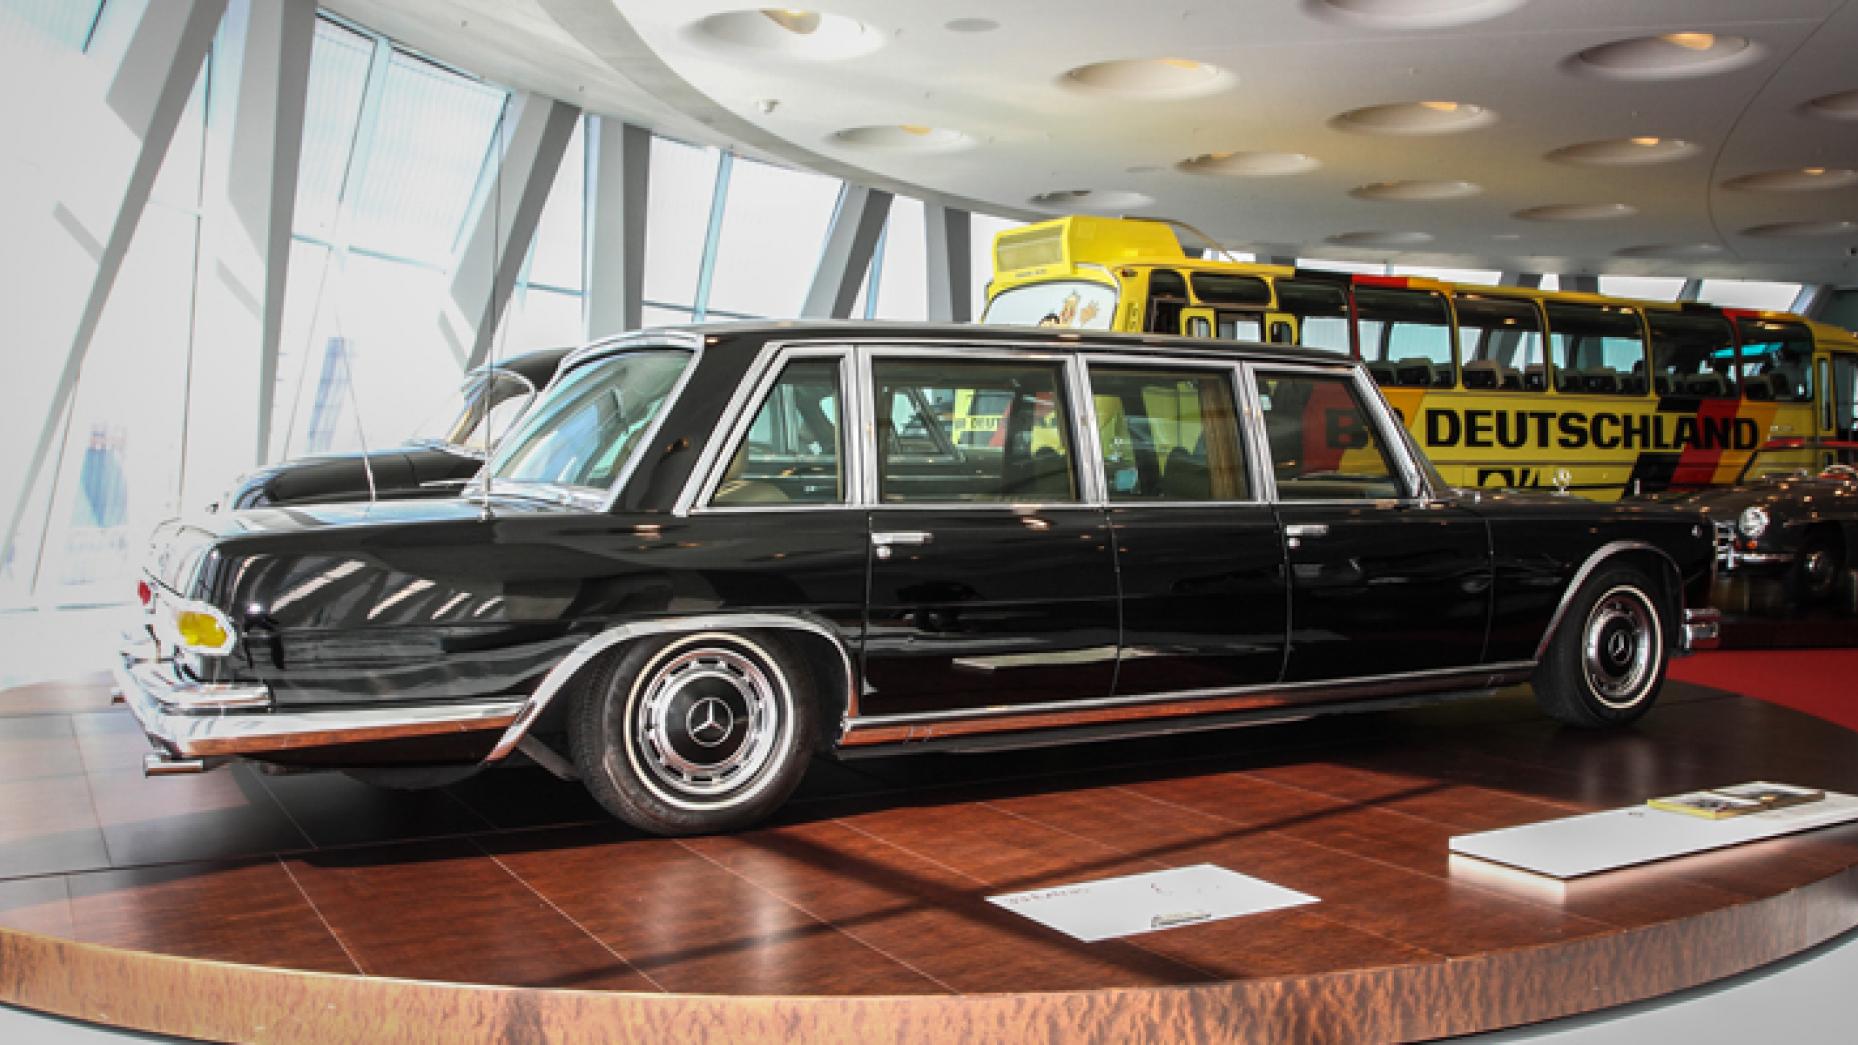 1965 MERCEDES-BENZ 600 PULLMAN: It’s a fully armoured limo that ferried around kings, chancellors and presidents. It’s got a 6.3-litre V8 producing 247hp, and a top speed of 75. Just two were built, and you must bow in its presence. This is the very definition of a Big Mercedes.